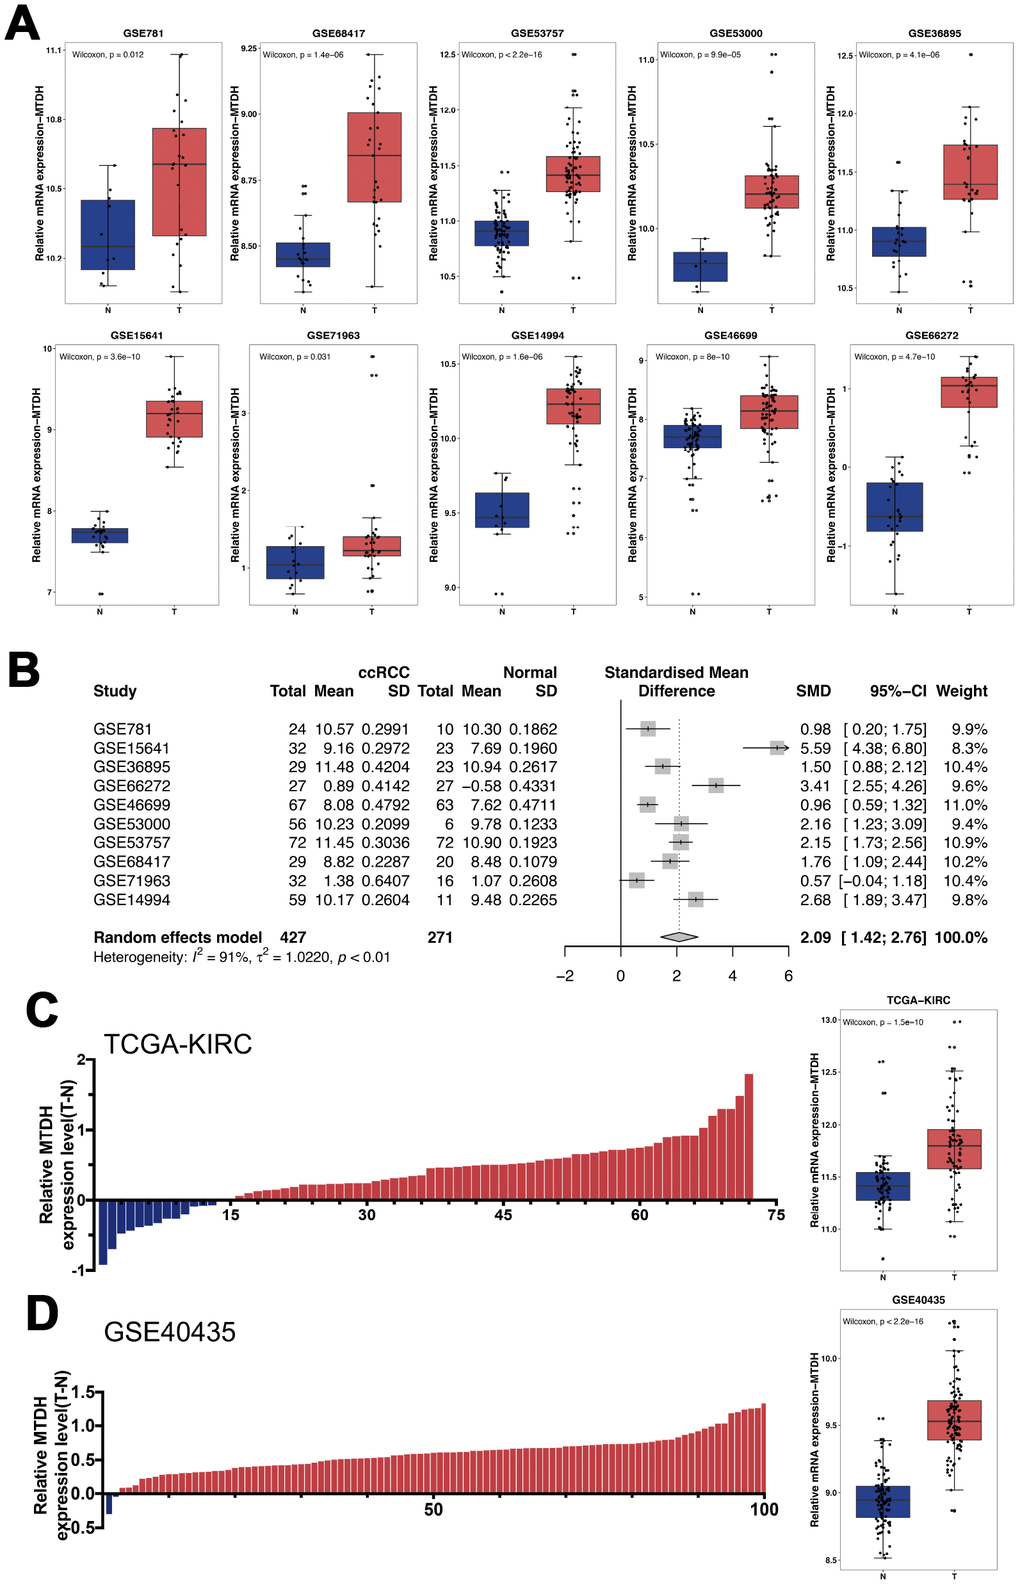 The relative mRNA expression levels of MTDH in ccRCC patients. (A) Based on GEO datasets, the mRNA expression of MTDH was significantly up-regulated in ccRCC tissues compared with normal kidney tissue in all 10 ccRCC GEO datasets. (B) The result of meta-analysis revealed that MTDH mRNA expression was still obviously increased in the union dataset. (C, D) Compared with matched paracancerous normal kidney tissues, MTDH mRNA expression was increased in 80.6%(58/72) and 98.0%(99/101) of ccRCC tissues in TCGA dataset and GSE40435, respectively.